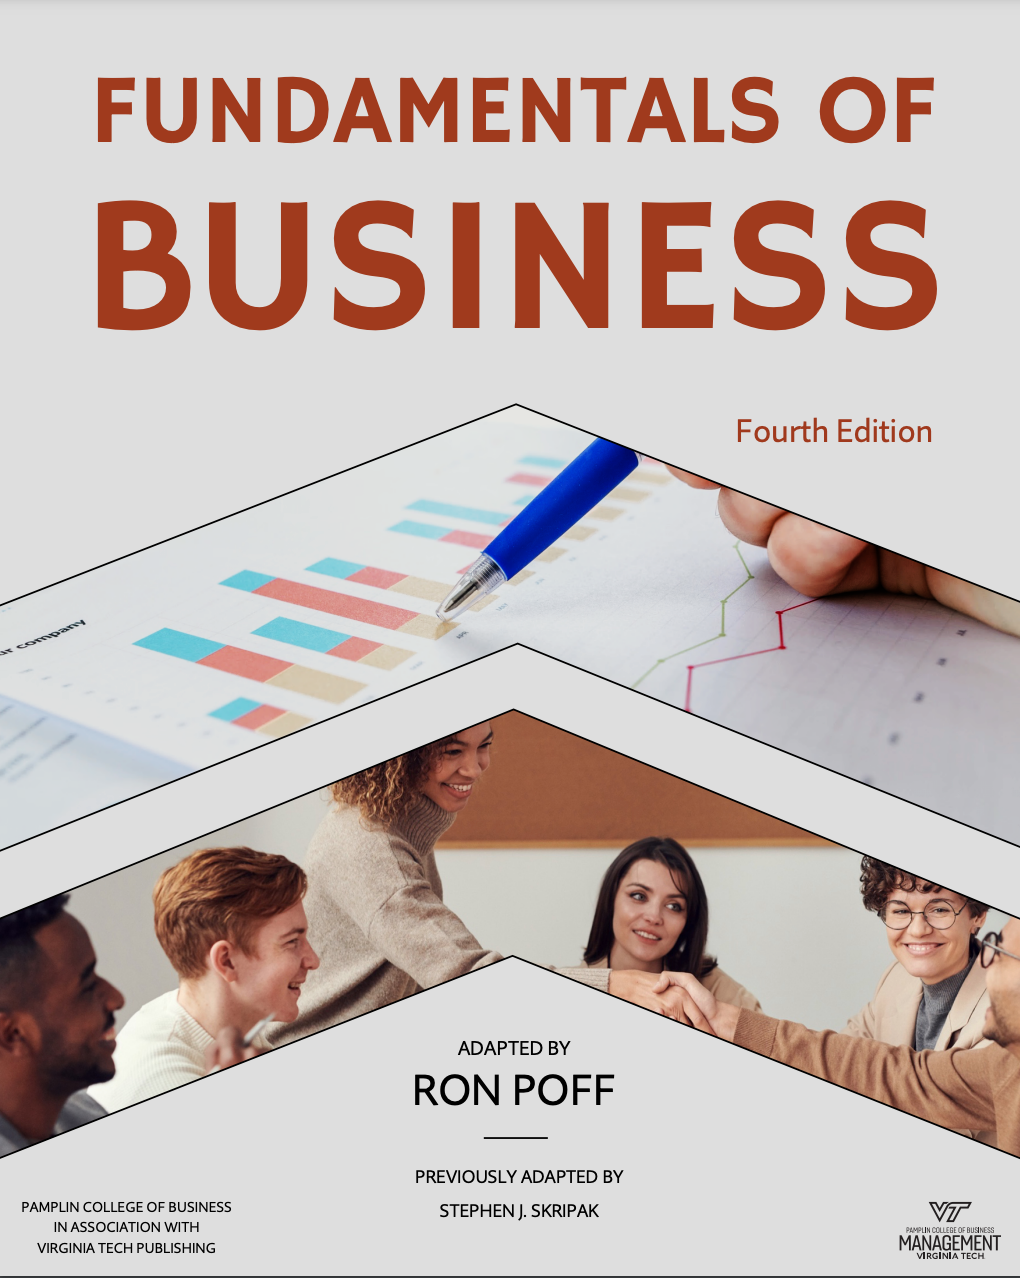 Read more about Fundamentals of Business - 4th Edition